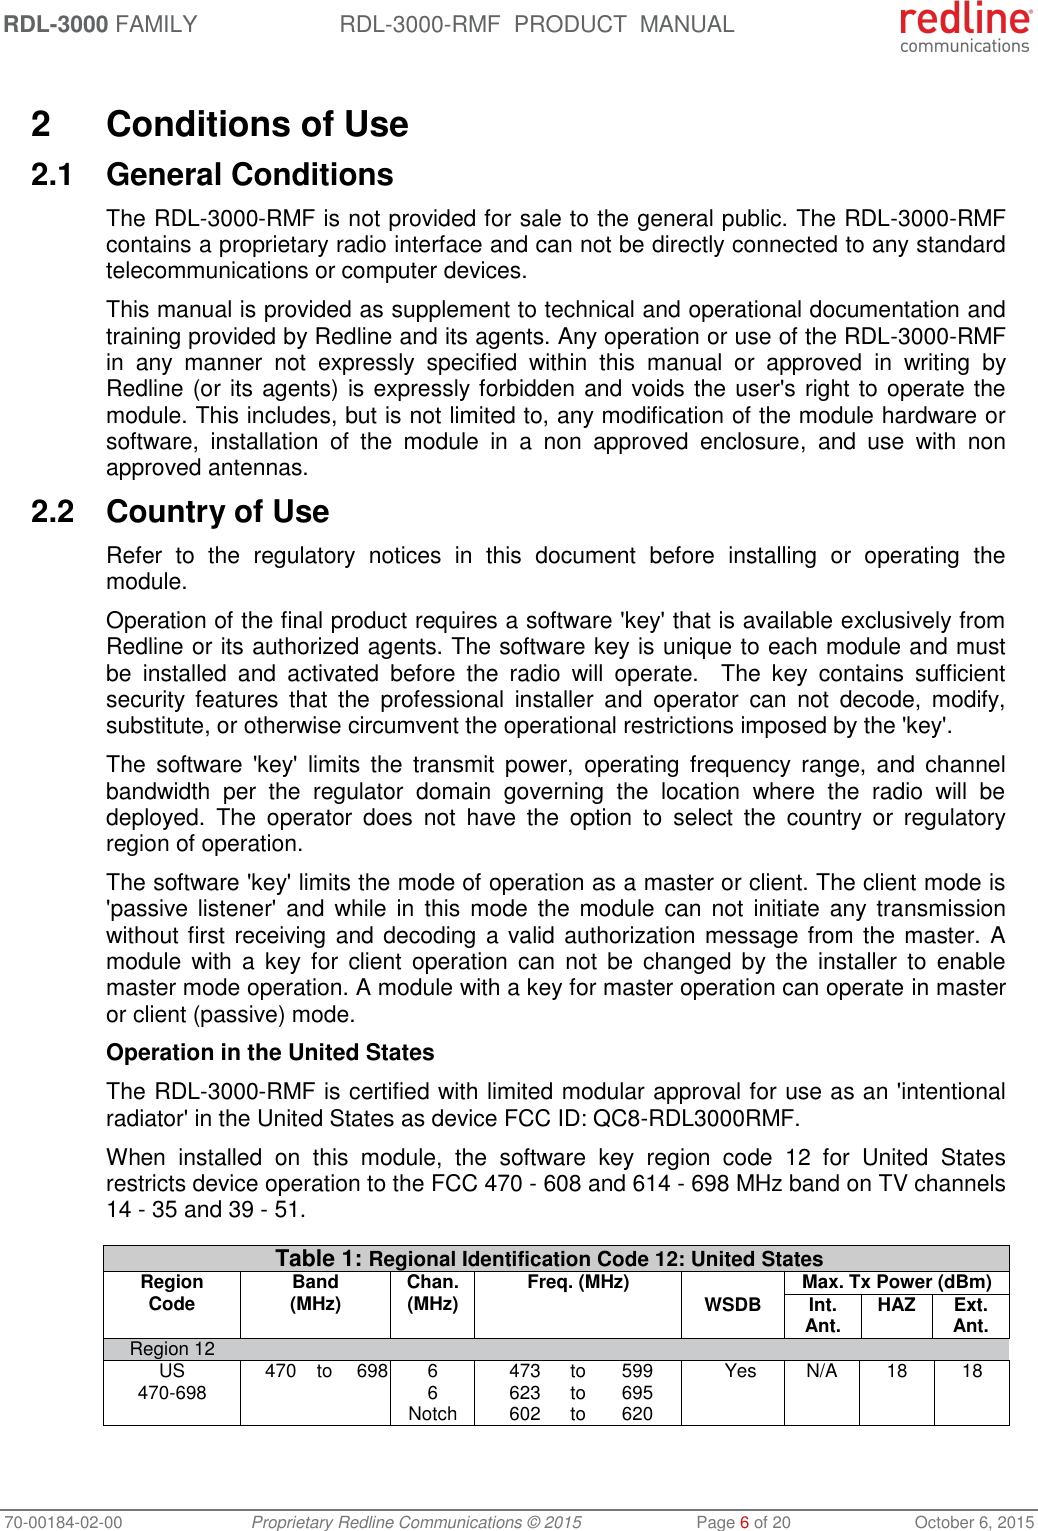 RDL-3000 FAMILY RDL-3000-RMF  PRODUCT  MANUAL 70-00184-02-00 Proprietary Redline Communications © 2015  Page 6 of 20  October 6, 2015  2  Conditions of Use 2.1  General Conditions The RDL-3000-RMF is not provided for sale to the general public. The RDL-3000-RMF contains a proprietary radio interface and can not be directly connected to any standard telecommunications or computer devices.  This manual is provided as supplement to technical and operational documentation and training provided by Redline and its agents. Any operation or use of the RDL-3000-RMF in  any  manner  not  expressly  specified  within  this  manual  or  approved  in  writing  by Redline (or its agents) is expressly forbidden and voids the user&apos;s right to operate the module. This includes, but is not limited to, any modification of the module hardware or software,  installation  of  the  module  in  a  non  approved  enclosure,  and  use  with  non approved antennas. 2.2  Country of Use Refer  to  the  regulatory  notices  in  this  document  before  installing  or  operating  the module.  Operation of the final product requires a software &apos;key&apos; that is available exclusively from Redline or its authorized agents. The software key is unique to each module and must be  installed  and  activated  before  the  radio  will  operate.    The  key  contains  sufficient security  features  that  the  professional  installer  and  operator  can  not  decode,  modify, substitute, or otherwise circumvent the operational restrictions imposed by the &apos;key&apos;.  The  software  &apos;key&apos;  limits  the  transmit  power,  operating  frequency  range,  and  channel bandwidth  per  the  regulator  domain  governing  the  location  where  the  radio  will  be deployed.  The  operator  does  not  have  the  option  to  select  the  country  or  regulatory region of operation. The software &apos;key&apos; limits the mode of operation as a master or client. The client mode is &apos;passive listener&apos;  and  while in  this mode  the  module  can not  initiate any transmission without first receiving and decoding a valid authorization message from the master. A module  with  a  key  for  client  operation  can  not  be  changed  by  the  installer  to  enable master mode operation. A module with a key for master operation can operate in master or client (passive) mode.  Operation in the United States The RDL-3000-RMF is certified with limited modular approval for use as an &apos;intentional radiator&apos; in the United States as device FCC ID: QC8-RDL3000RMF.  When  installed  on  this  module,  the  software  key  region  code  12  for  United  States restricts device operation to the FCC 470 - 608 and 614 - 698 MHz band on TV channels 14 - 35 and 39 - 51.  Table 1: Regional Identification Code 12: United States Region Code Band (MHz) Chan. (MHz) Freq. (MHz)  Max. Tx Power (dBm) WSDB Int. Ant.  HAZ Ext. Ant. Region 12        US  470 to 698 6  473 to 599 Yes N/A 18 18 470-698  6  623 to 695       Notch  602 to 620      